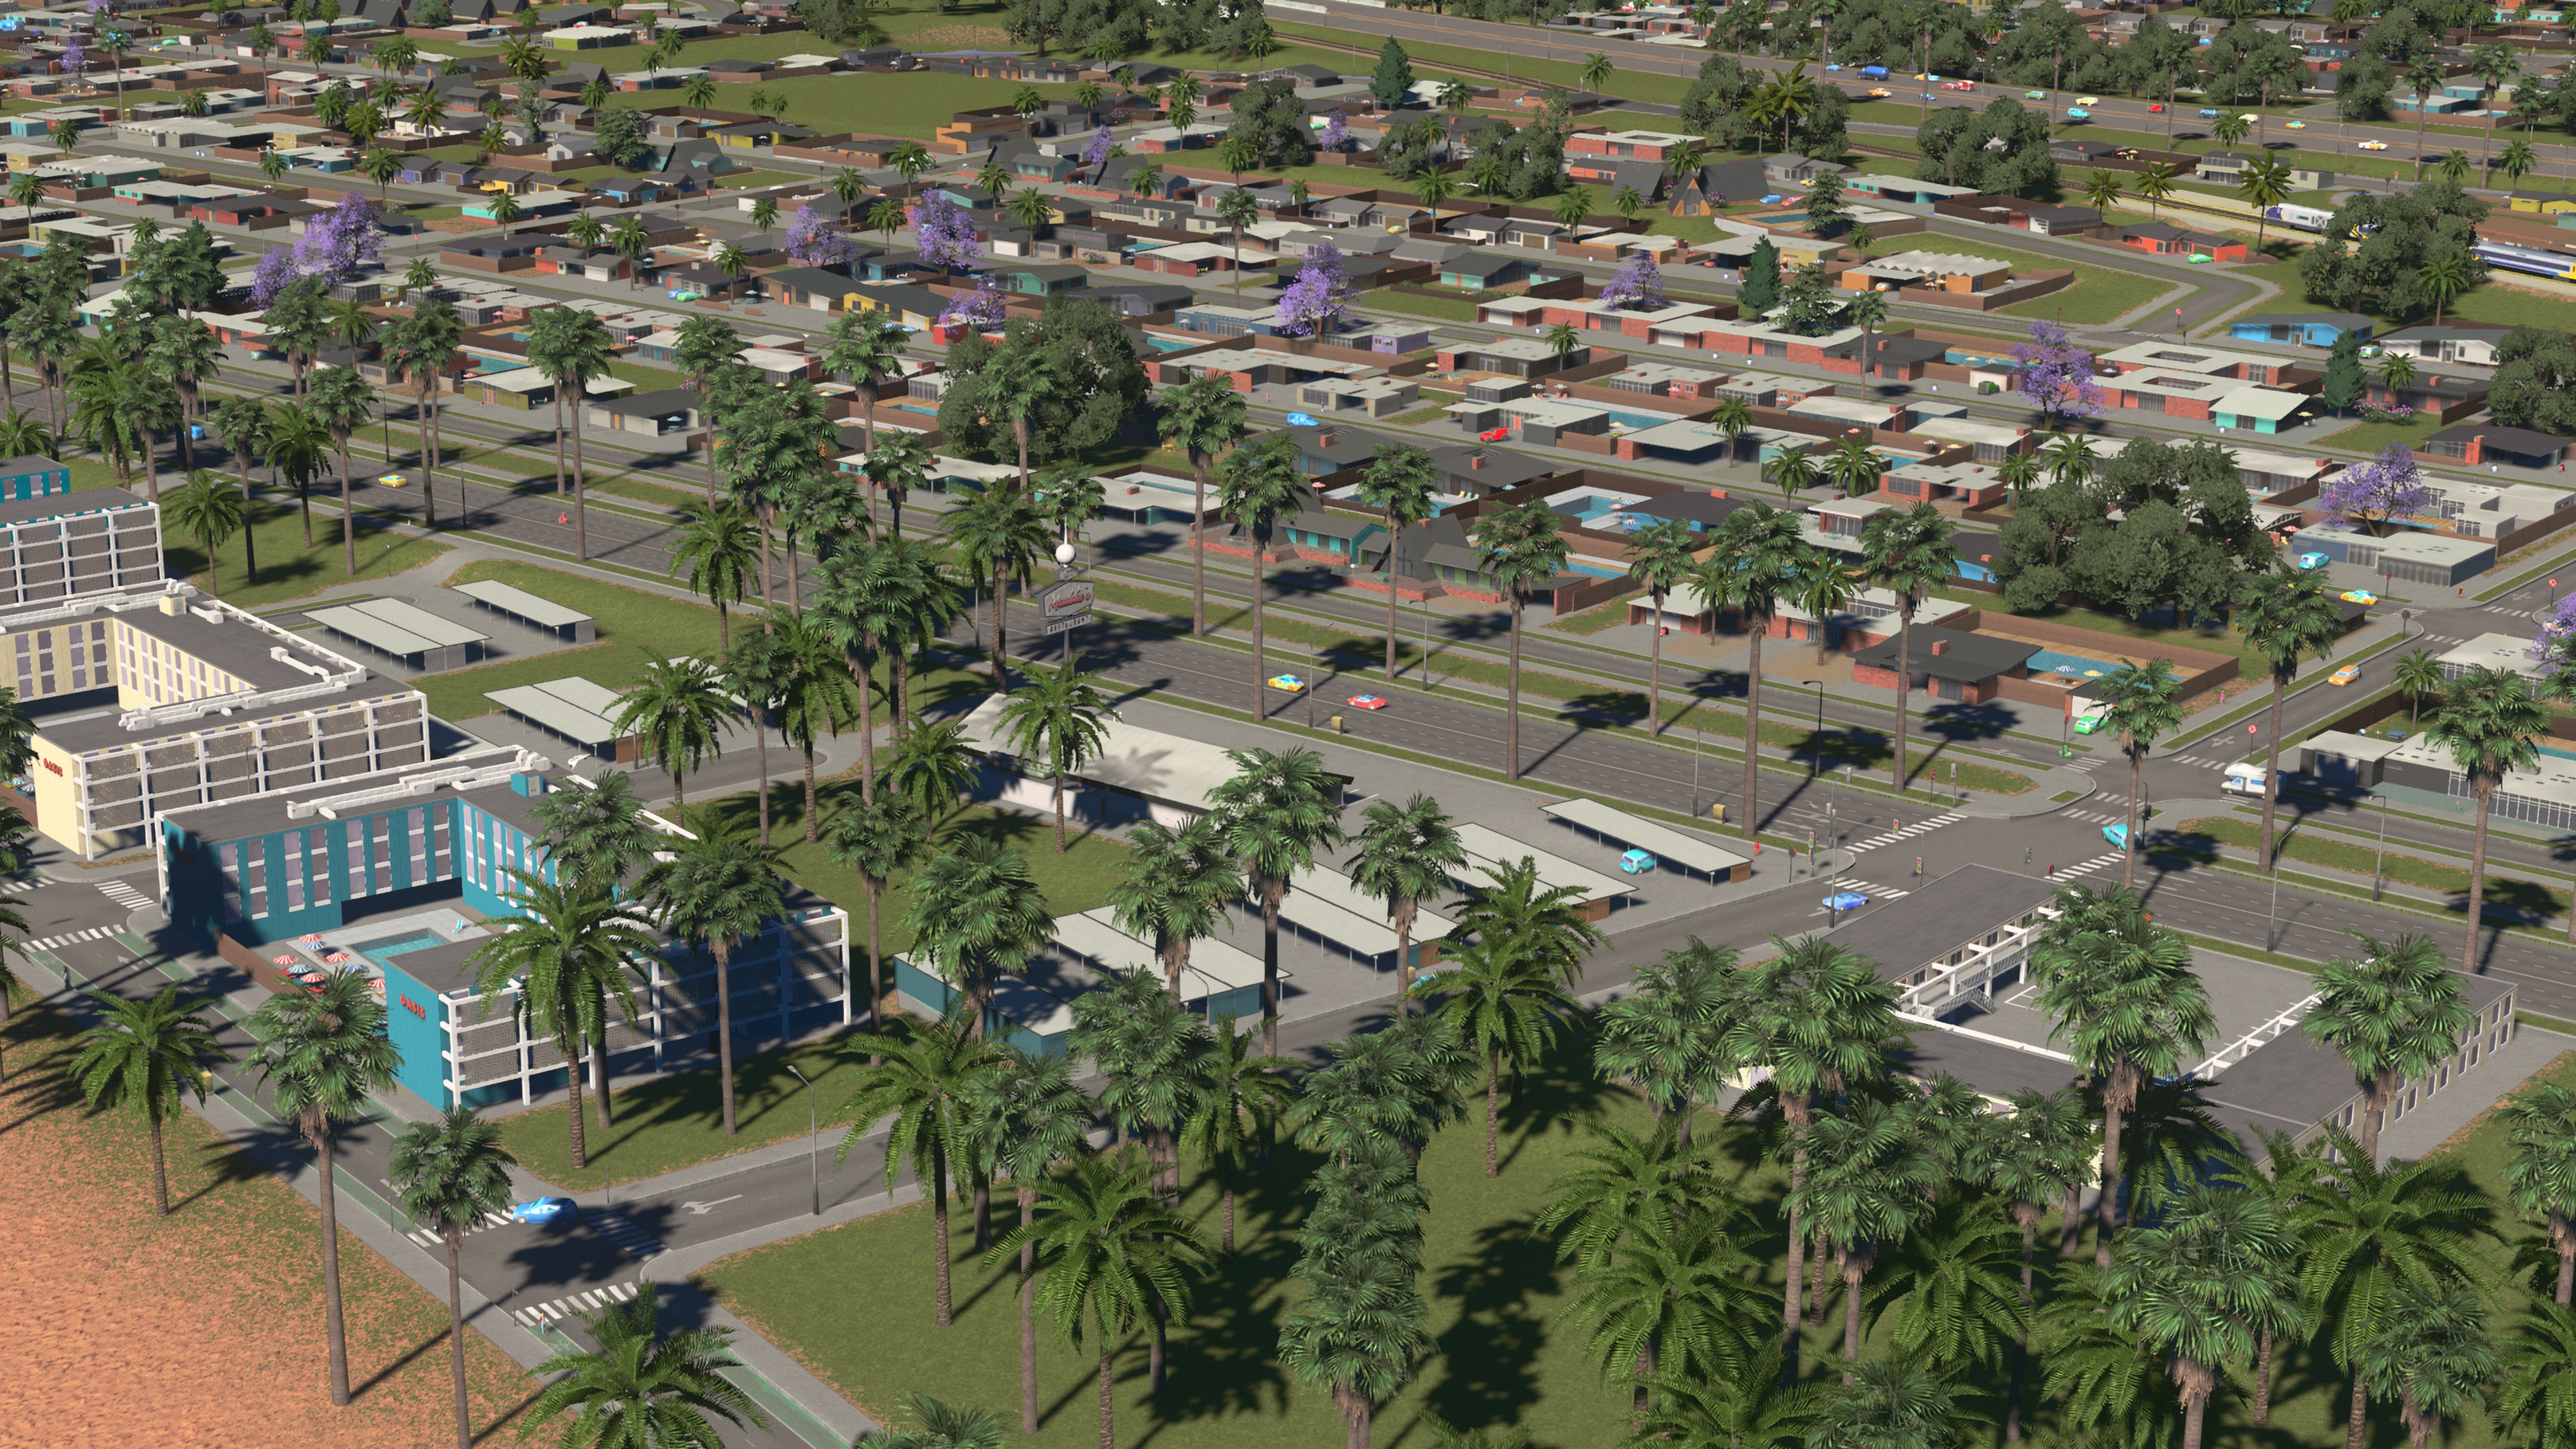 Buy Cities: Skylines - Plazas & Promenades Bundle from the Humble Store